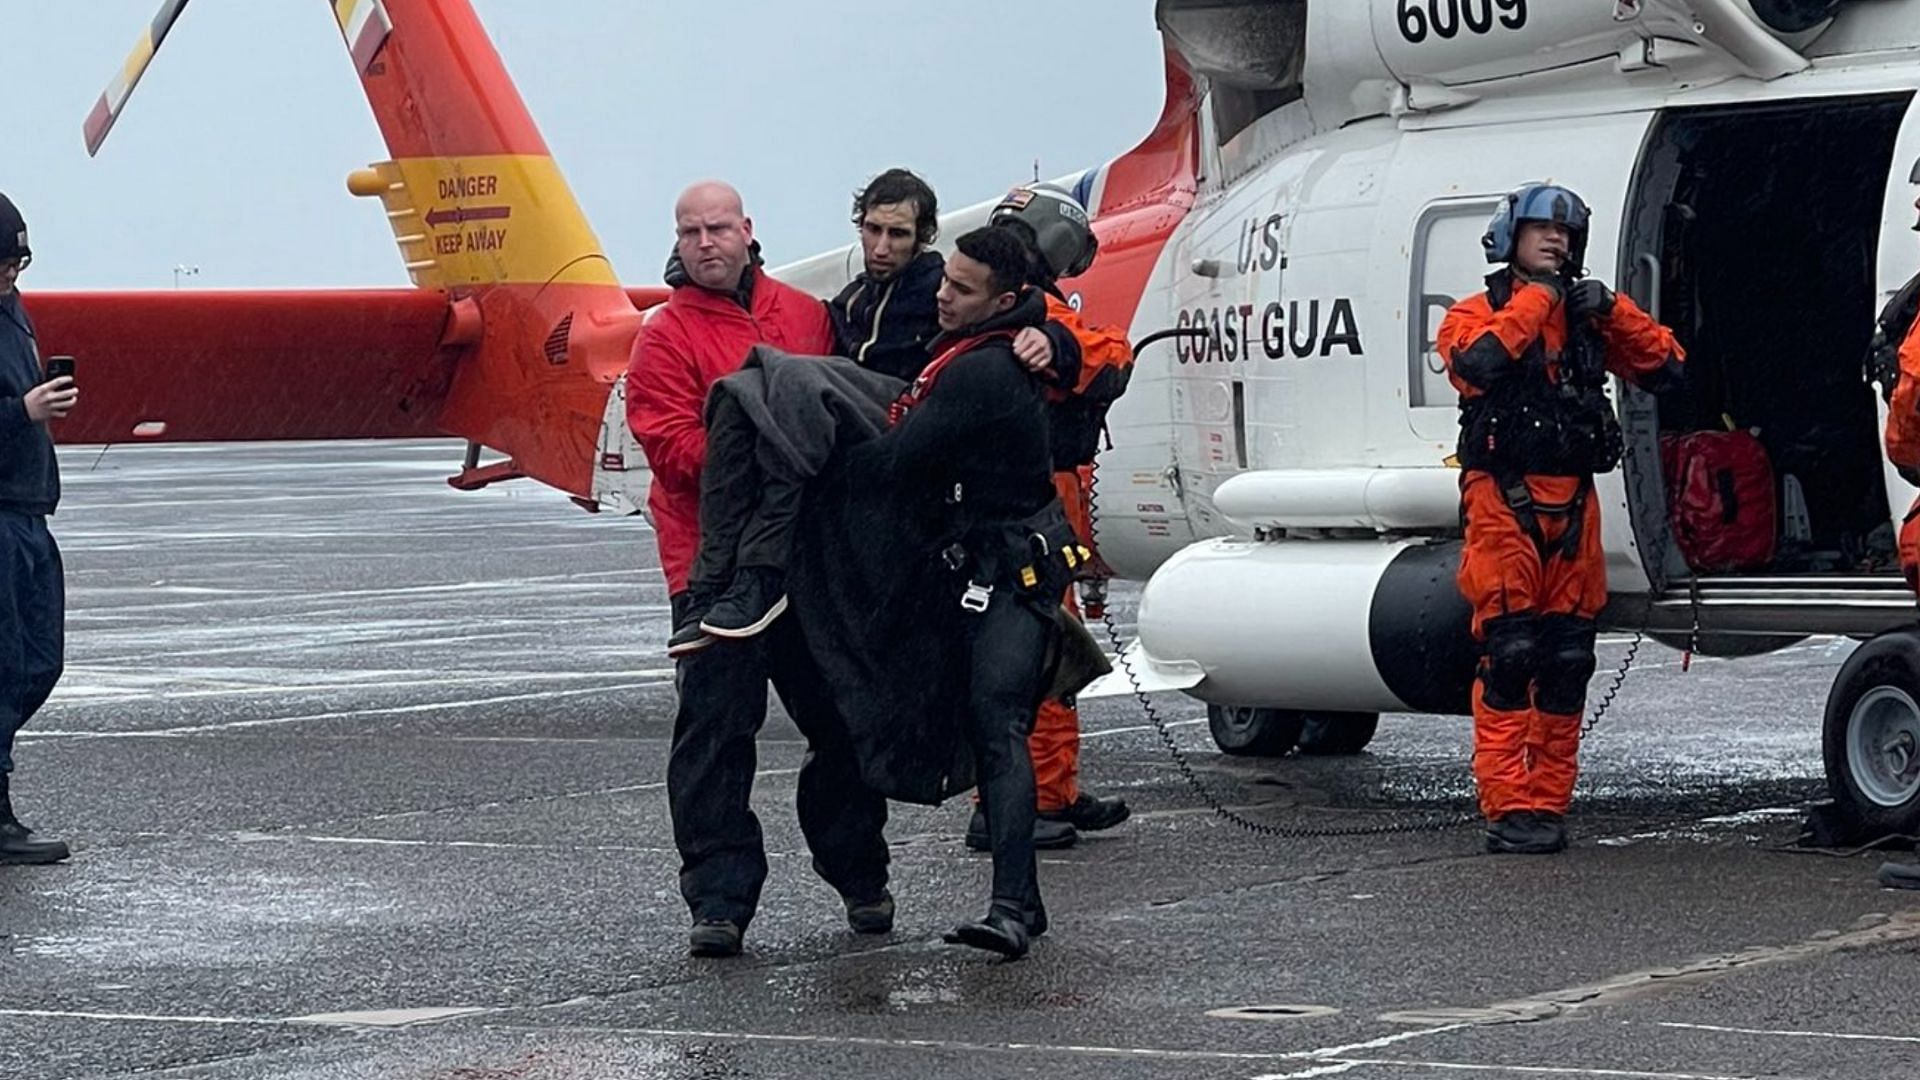 The U.S. Coast Guard braved the turbulent waters of River Columbia to save Jericho Labonte (Image via Twitter @/USCGPacificNW)